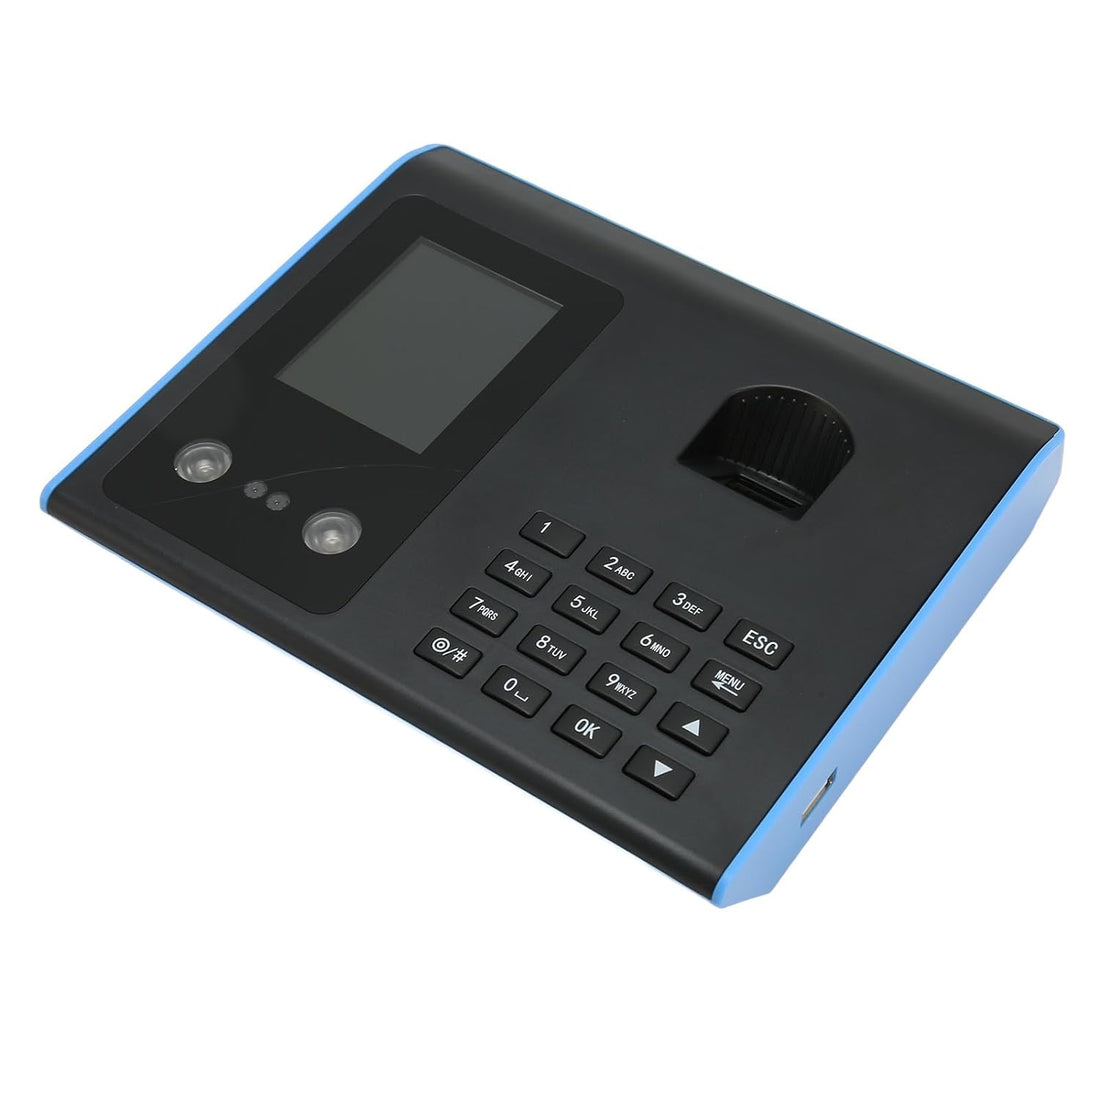 Face Fingerprint Time Attendance Machine with Automatic Time Calculation, Biometric Employee Attendance for Offices, Hotels, and More (US Plug)